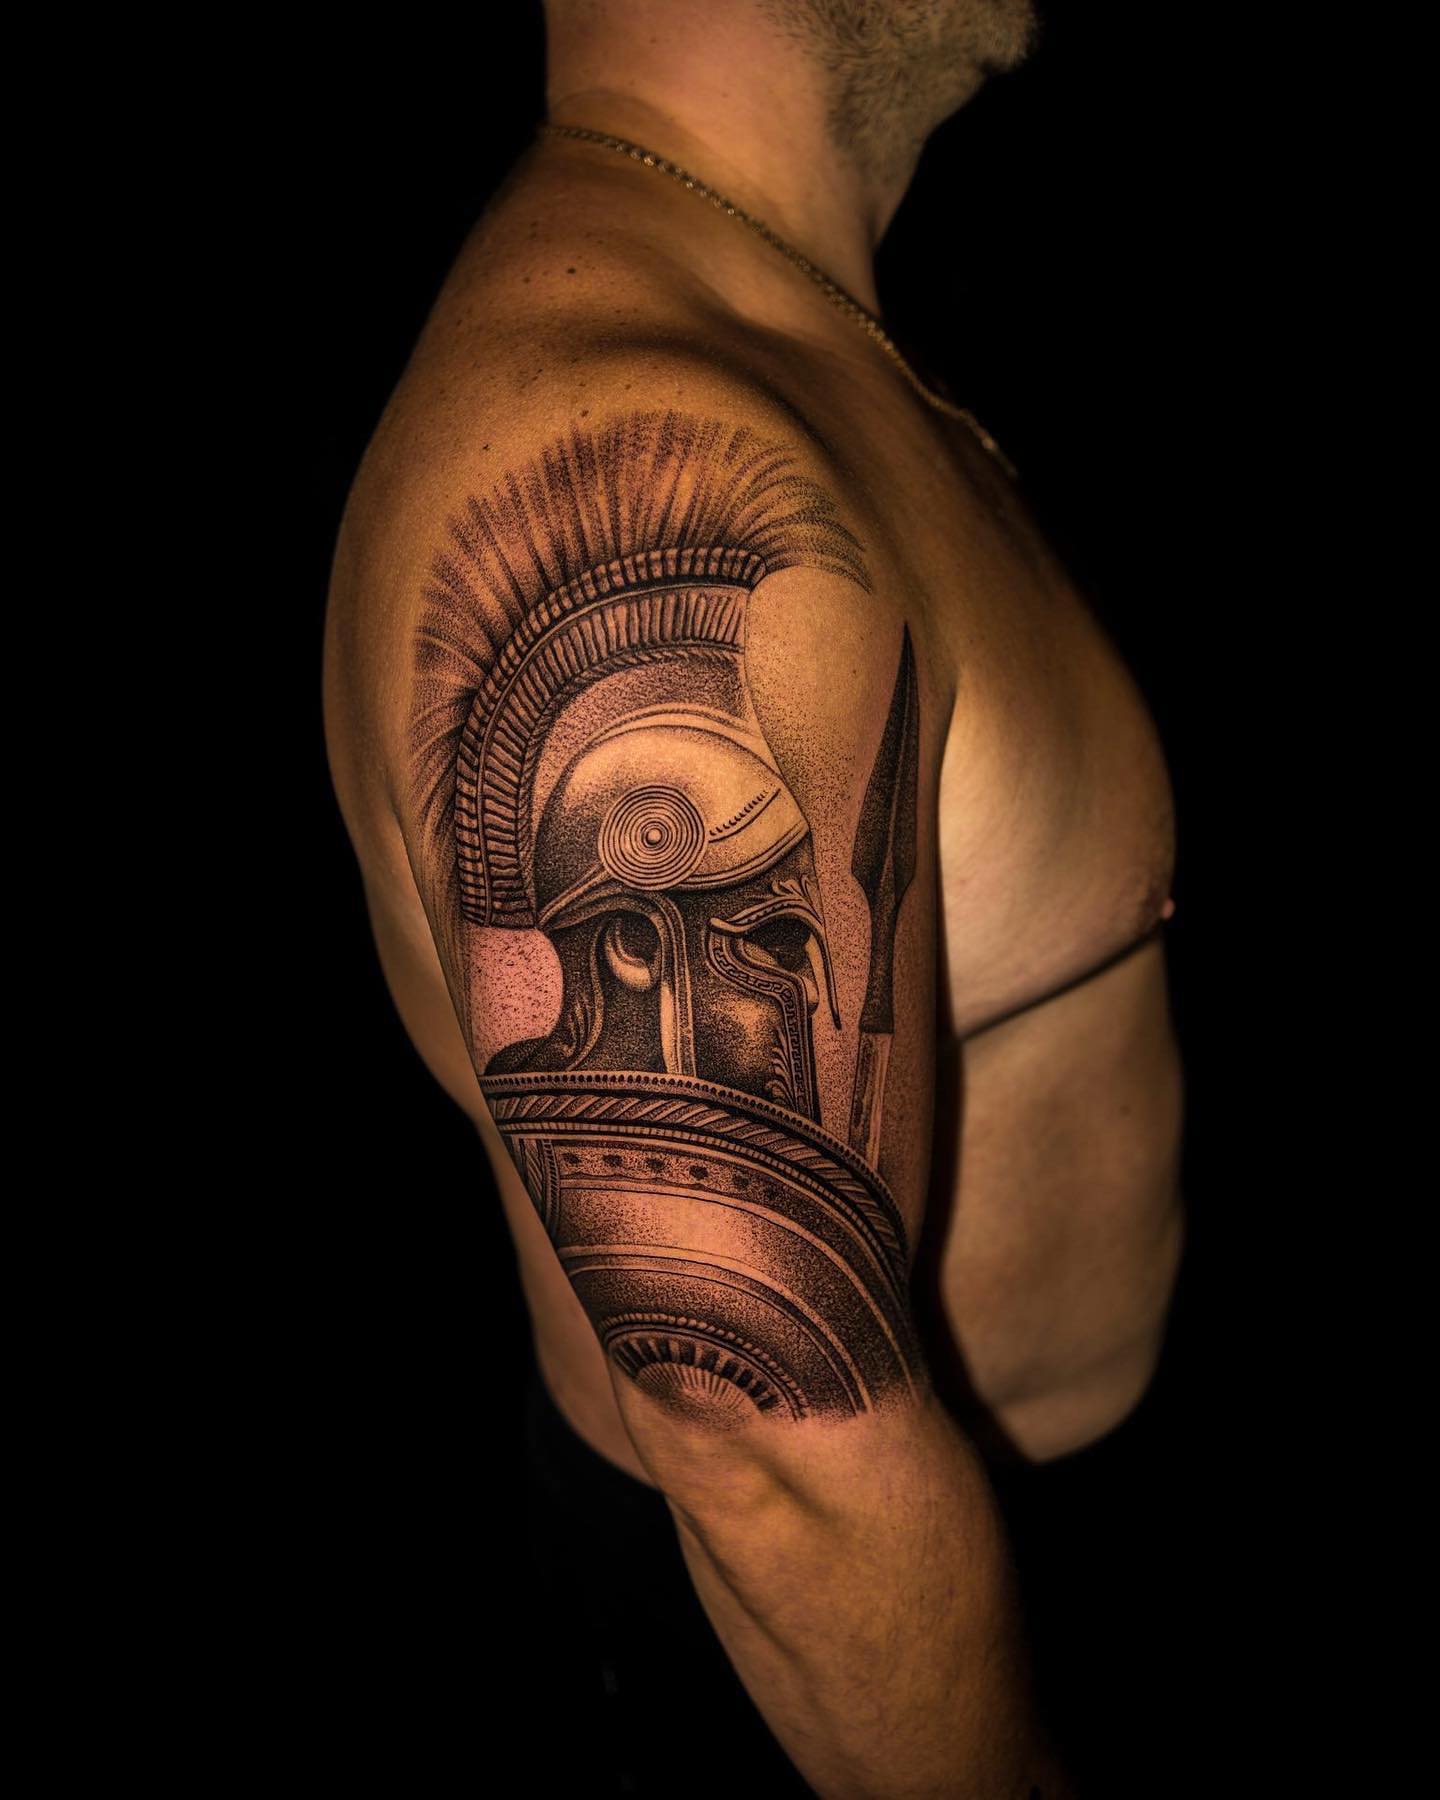 Here is a highly-detailed warrior tattoo on arm. There is really not much to say since there is a pure perfection above. Go for it if you are brave enough.